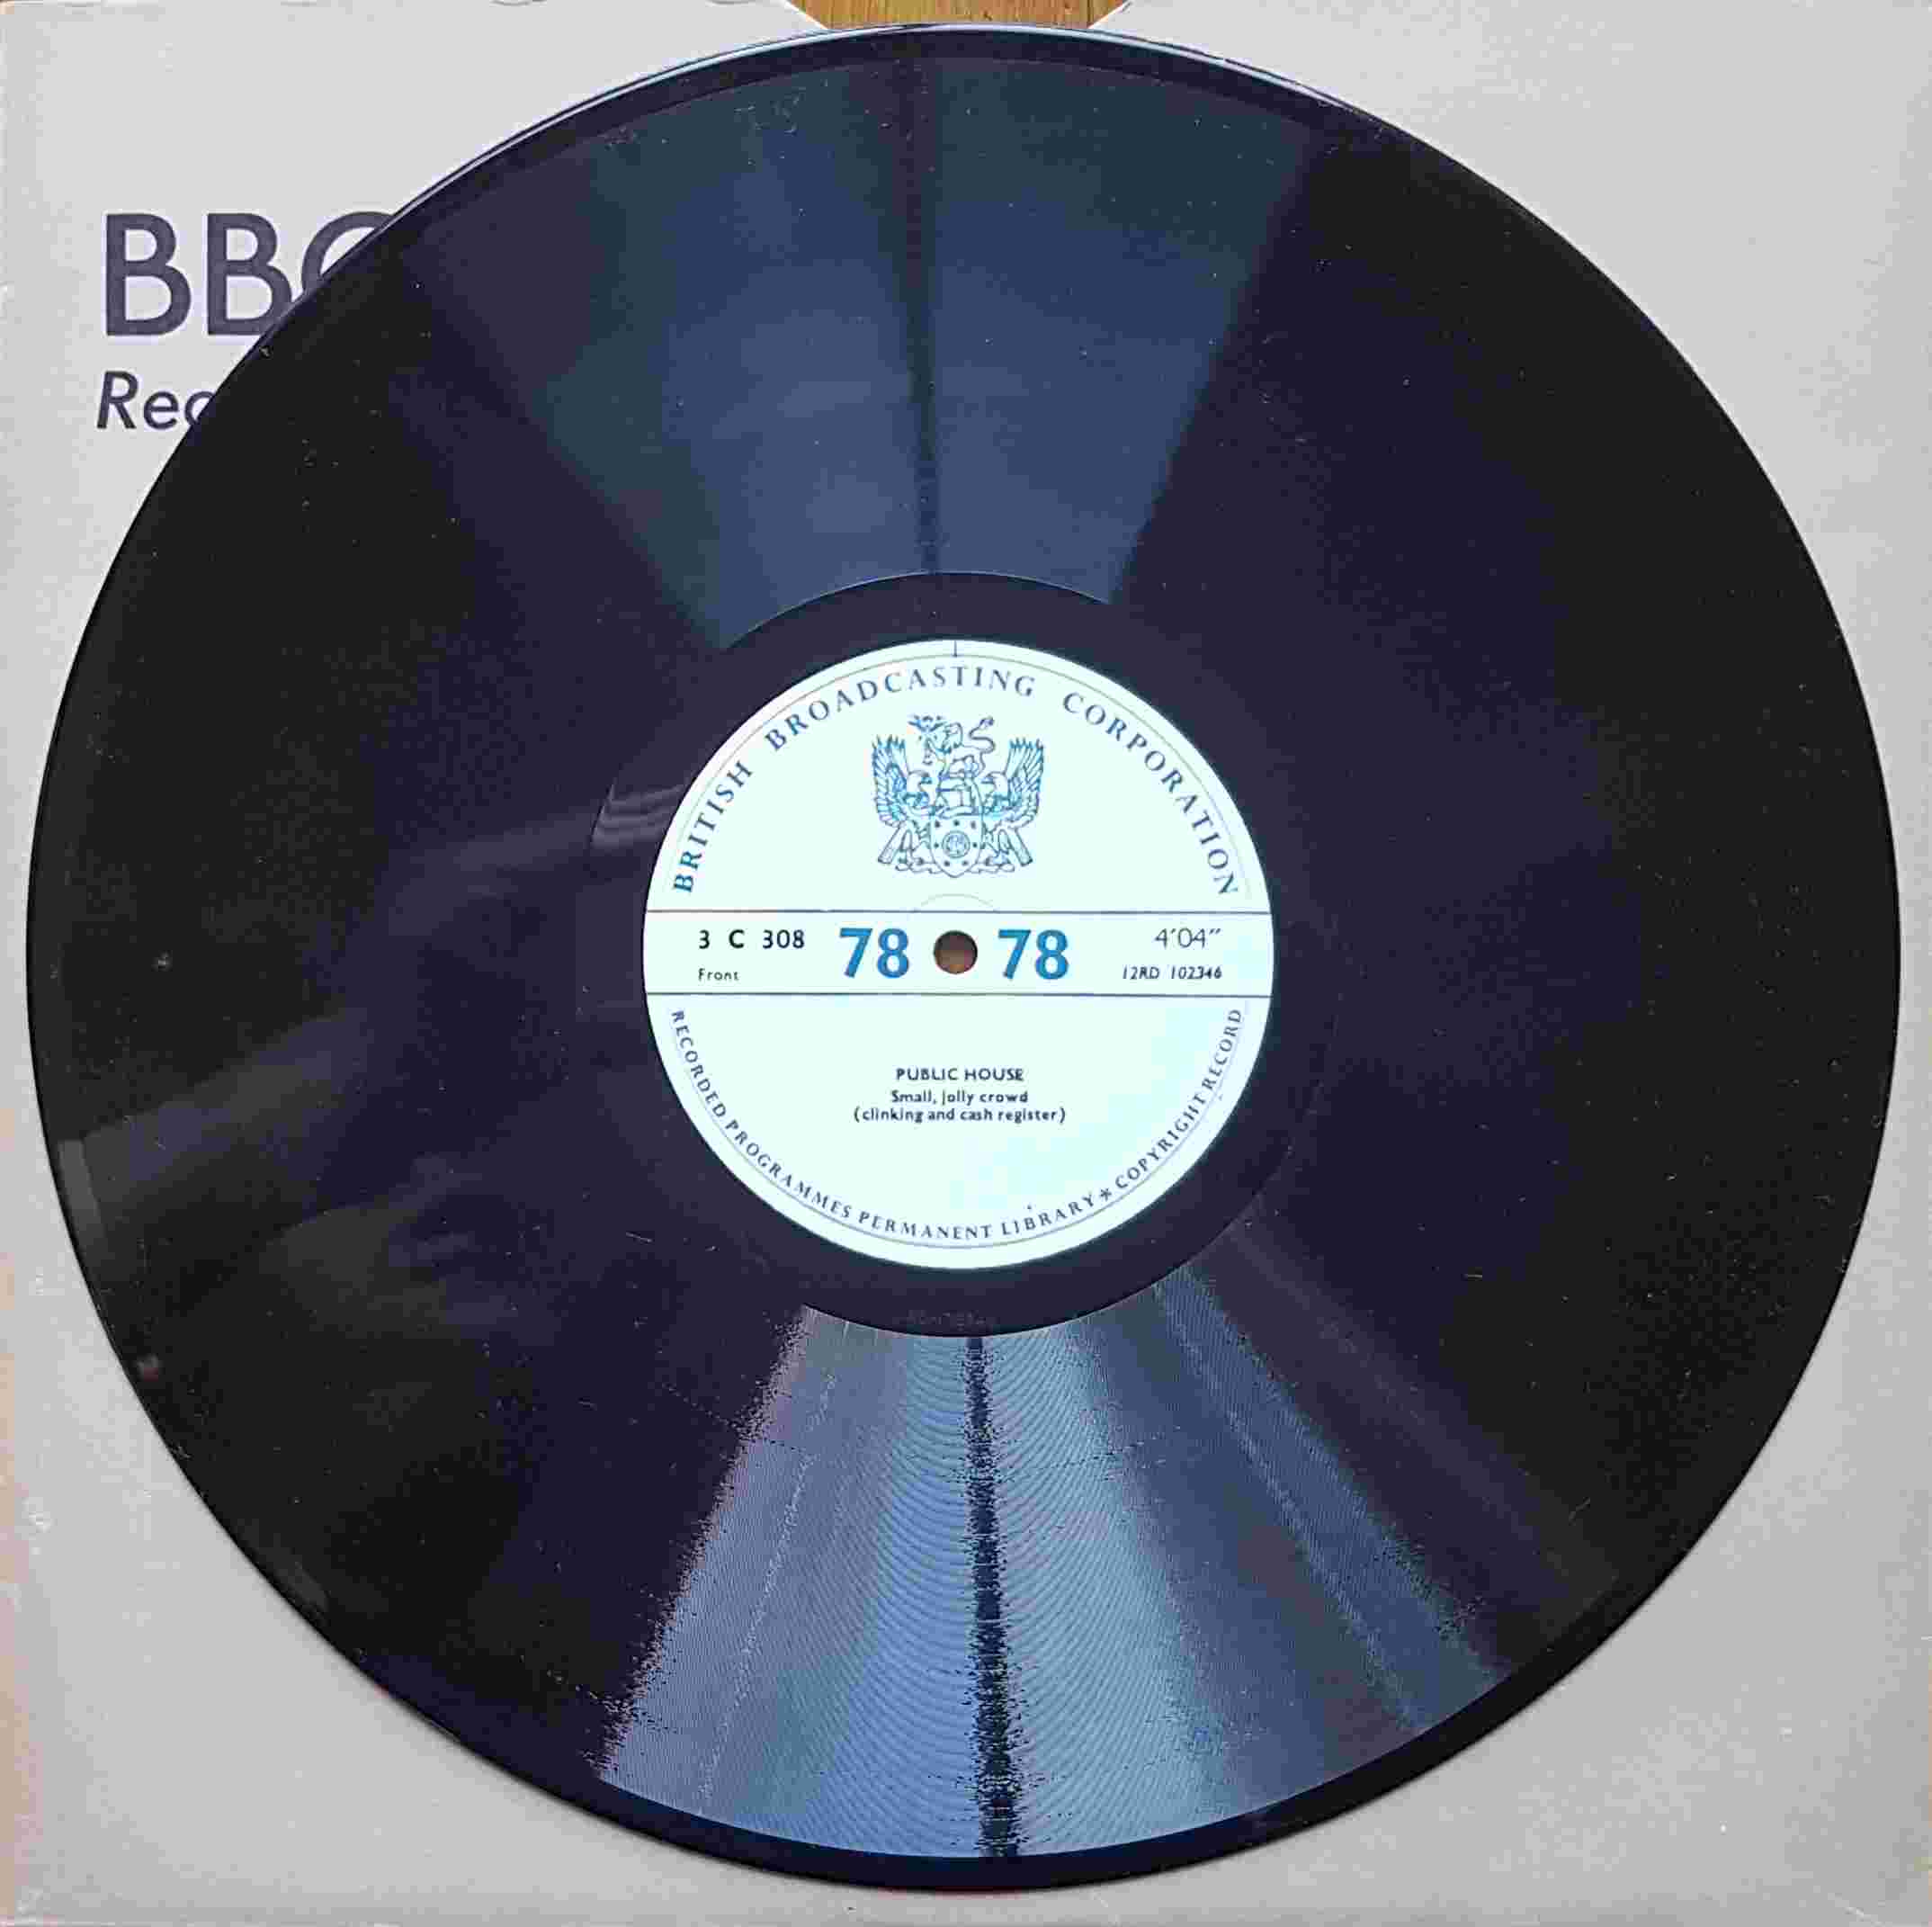 Picture of 3 C 308 Public house by artist Not registered from the BBC records and Tapes library